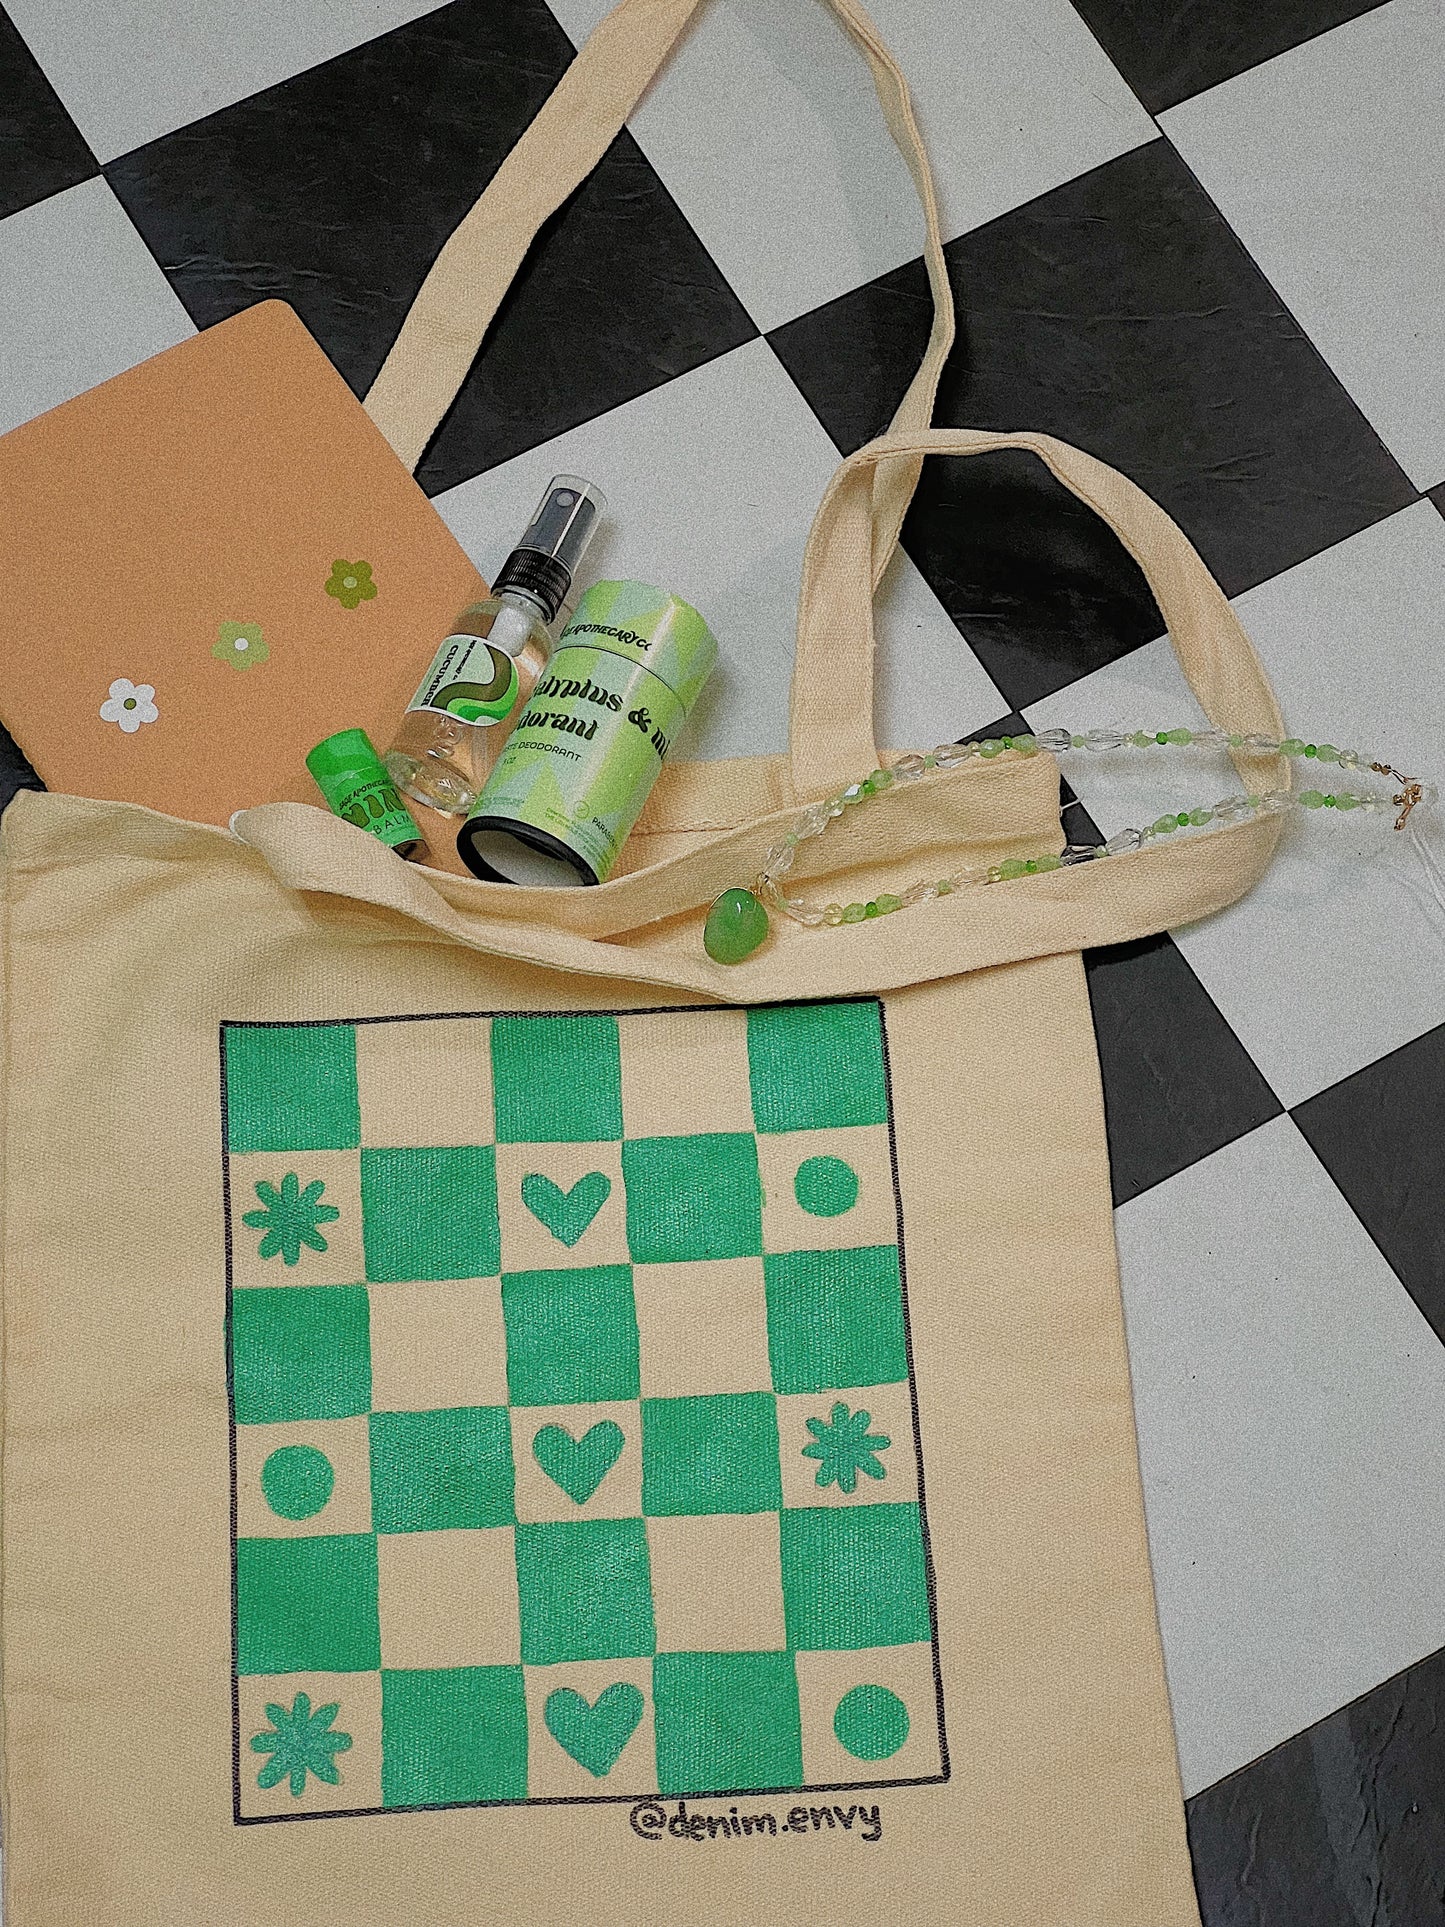 GROOVY-CHECKERED HAND-PAINTED TOTE BAG